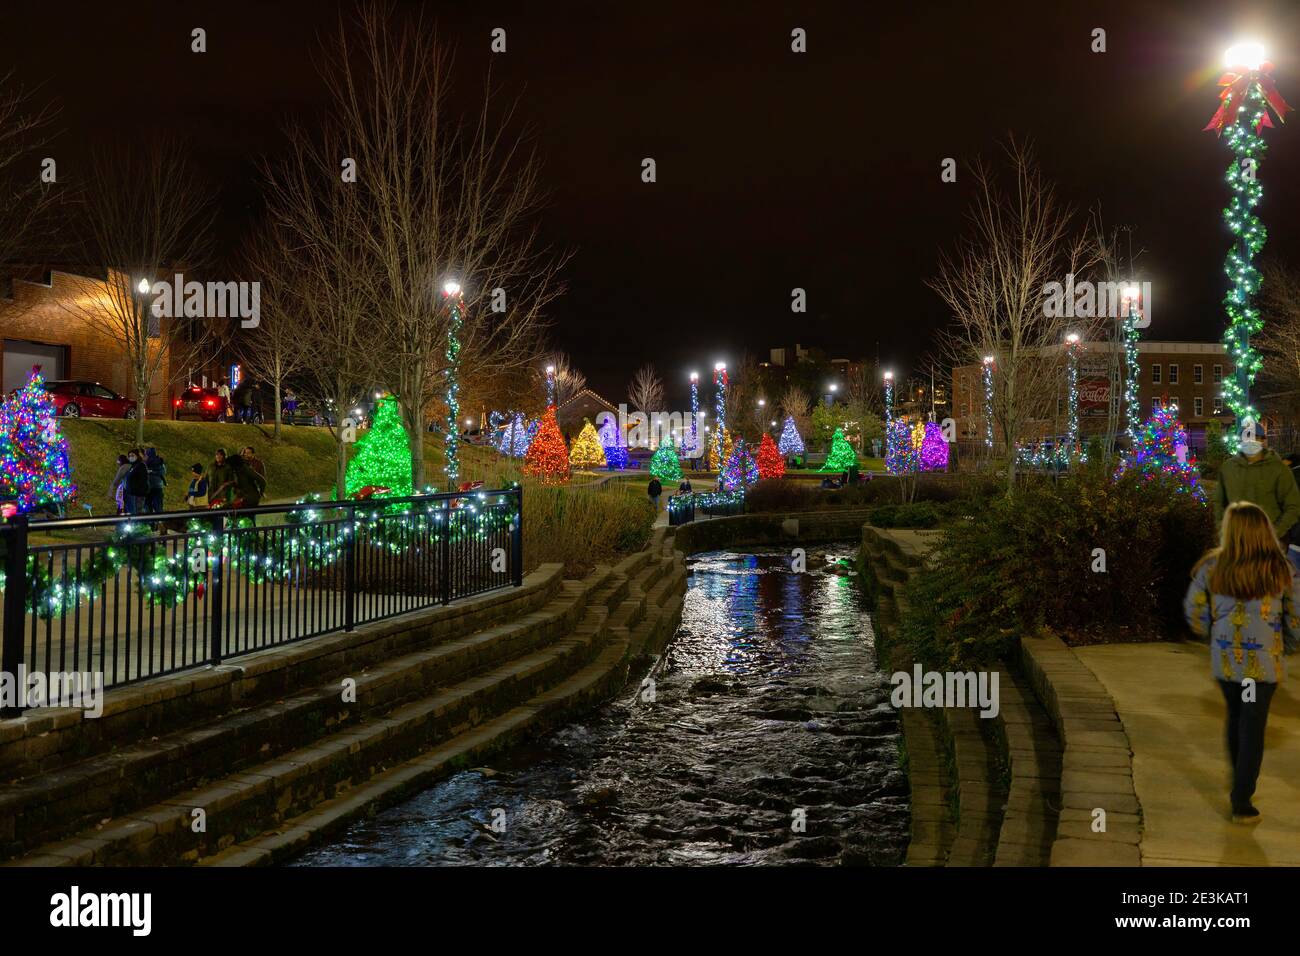 Johnson City, Tennessee, USA - December 20, 2020:  Christmas trees and lights at night in Founders Day Park. Stock Photo